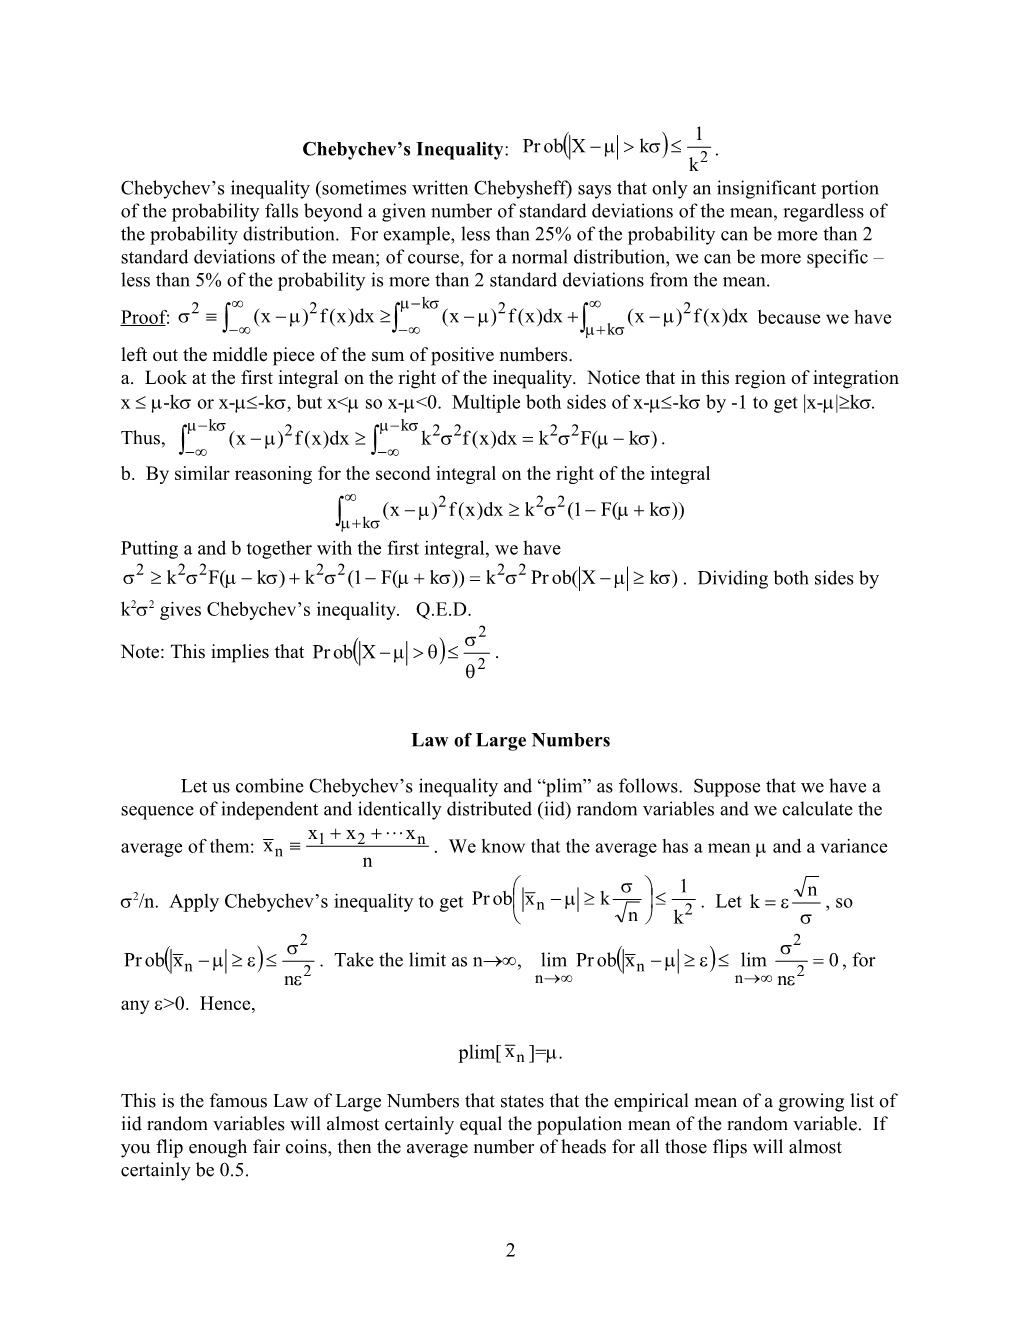 Convergence in Probability